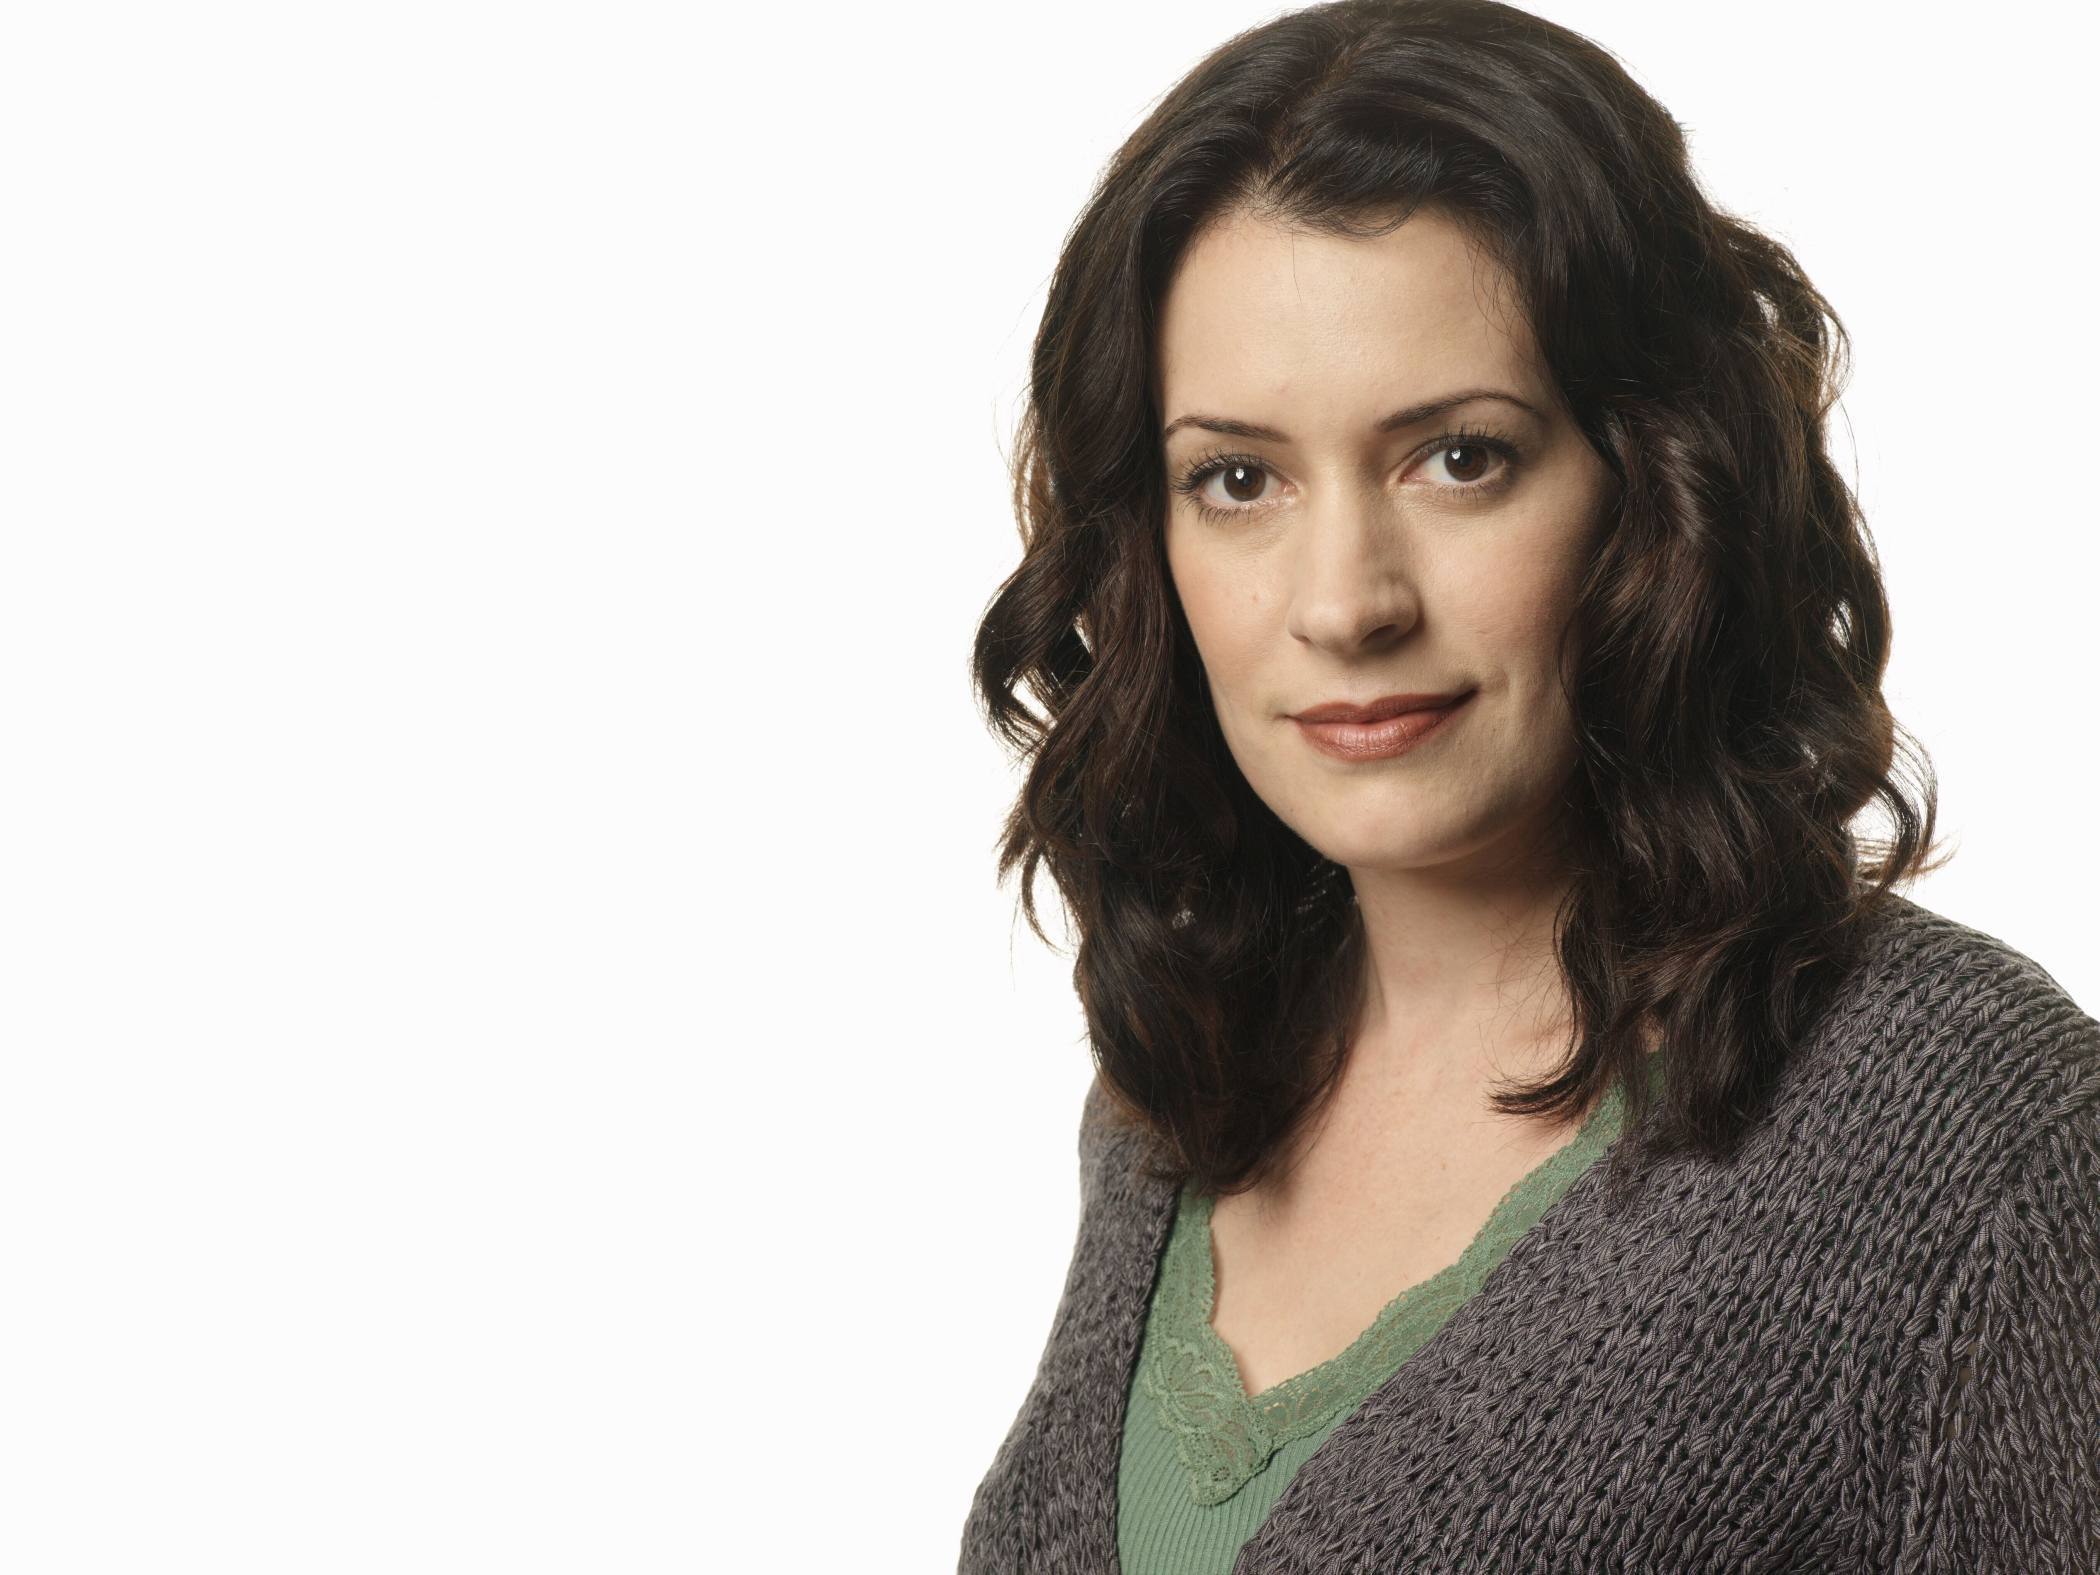 Picture of Paget Brewster Of Celebrities